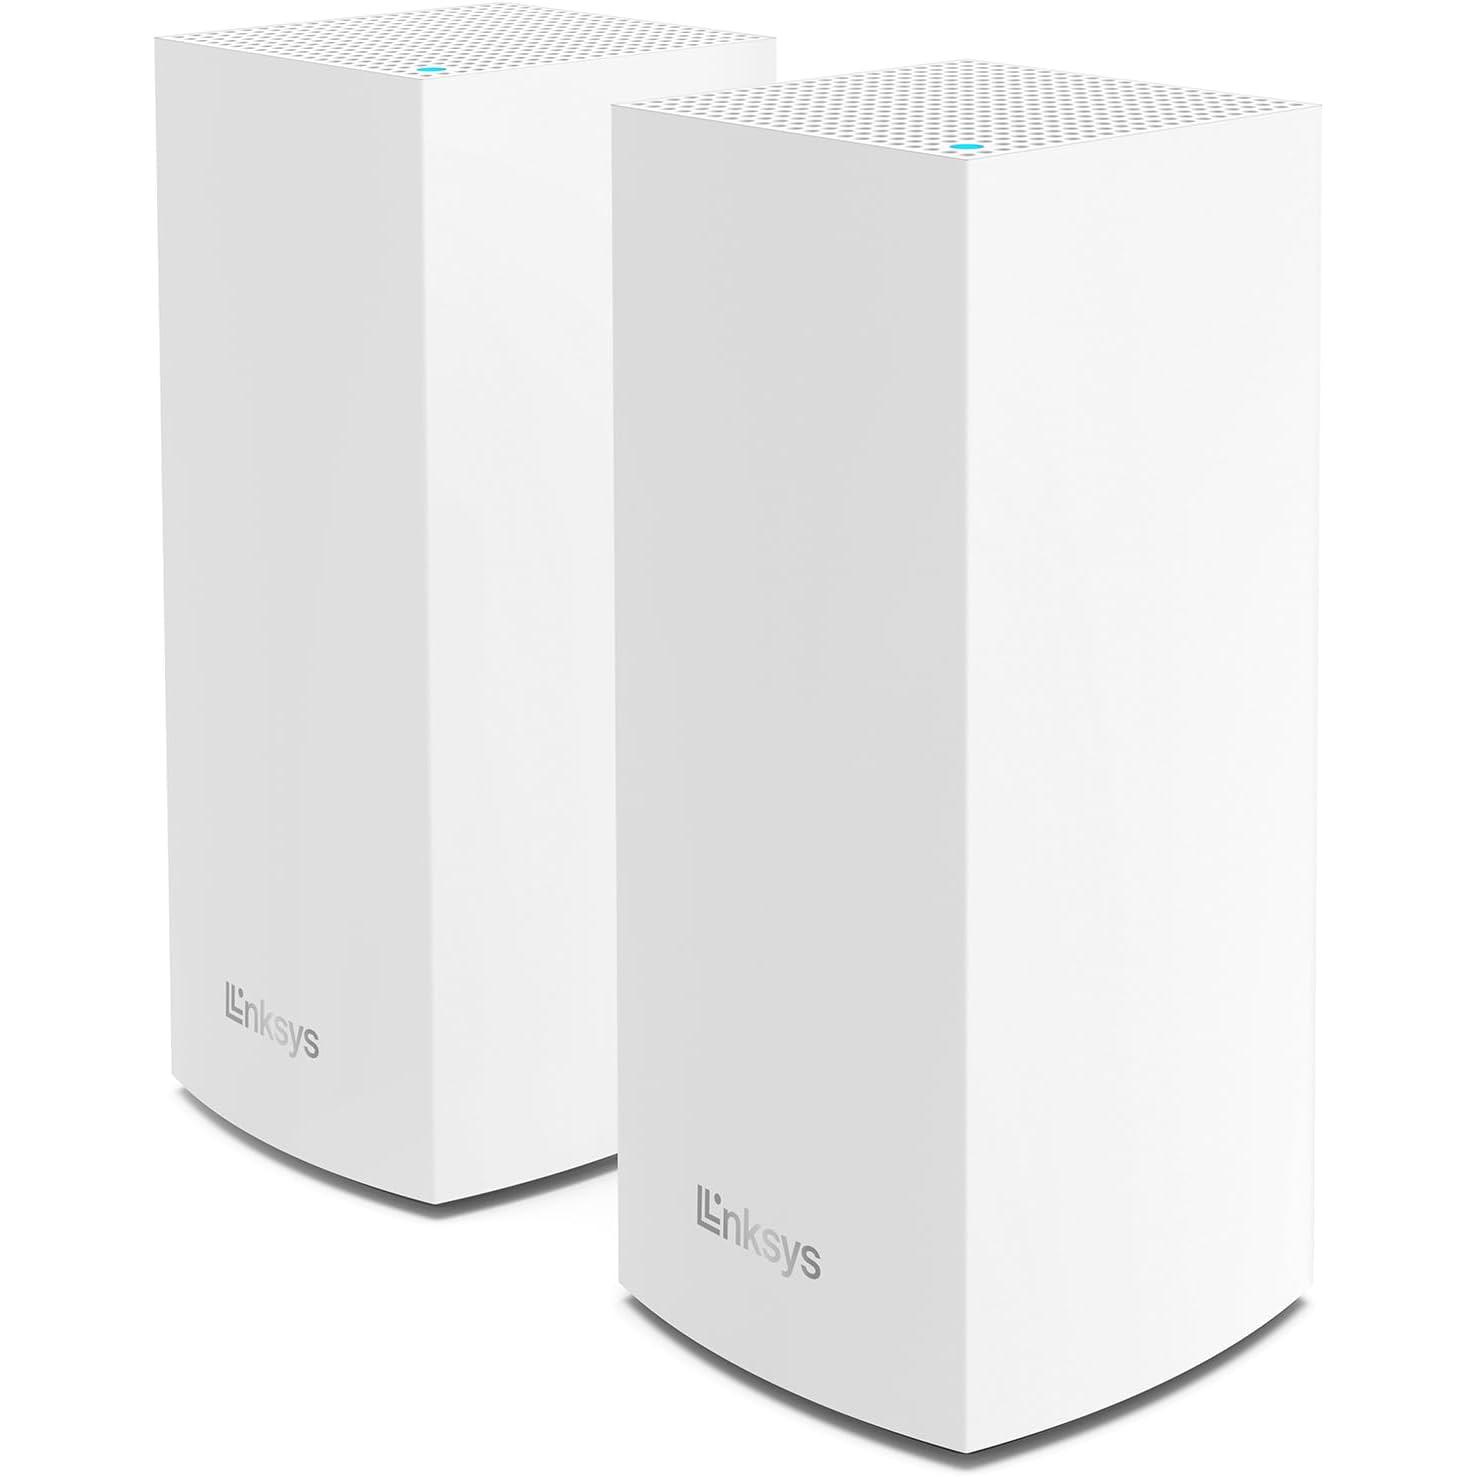 Linksys MX8000 Tri-Band AX4000 Mesh WiFi 6 Router System 2 Pack for $140.64 Shipped